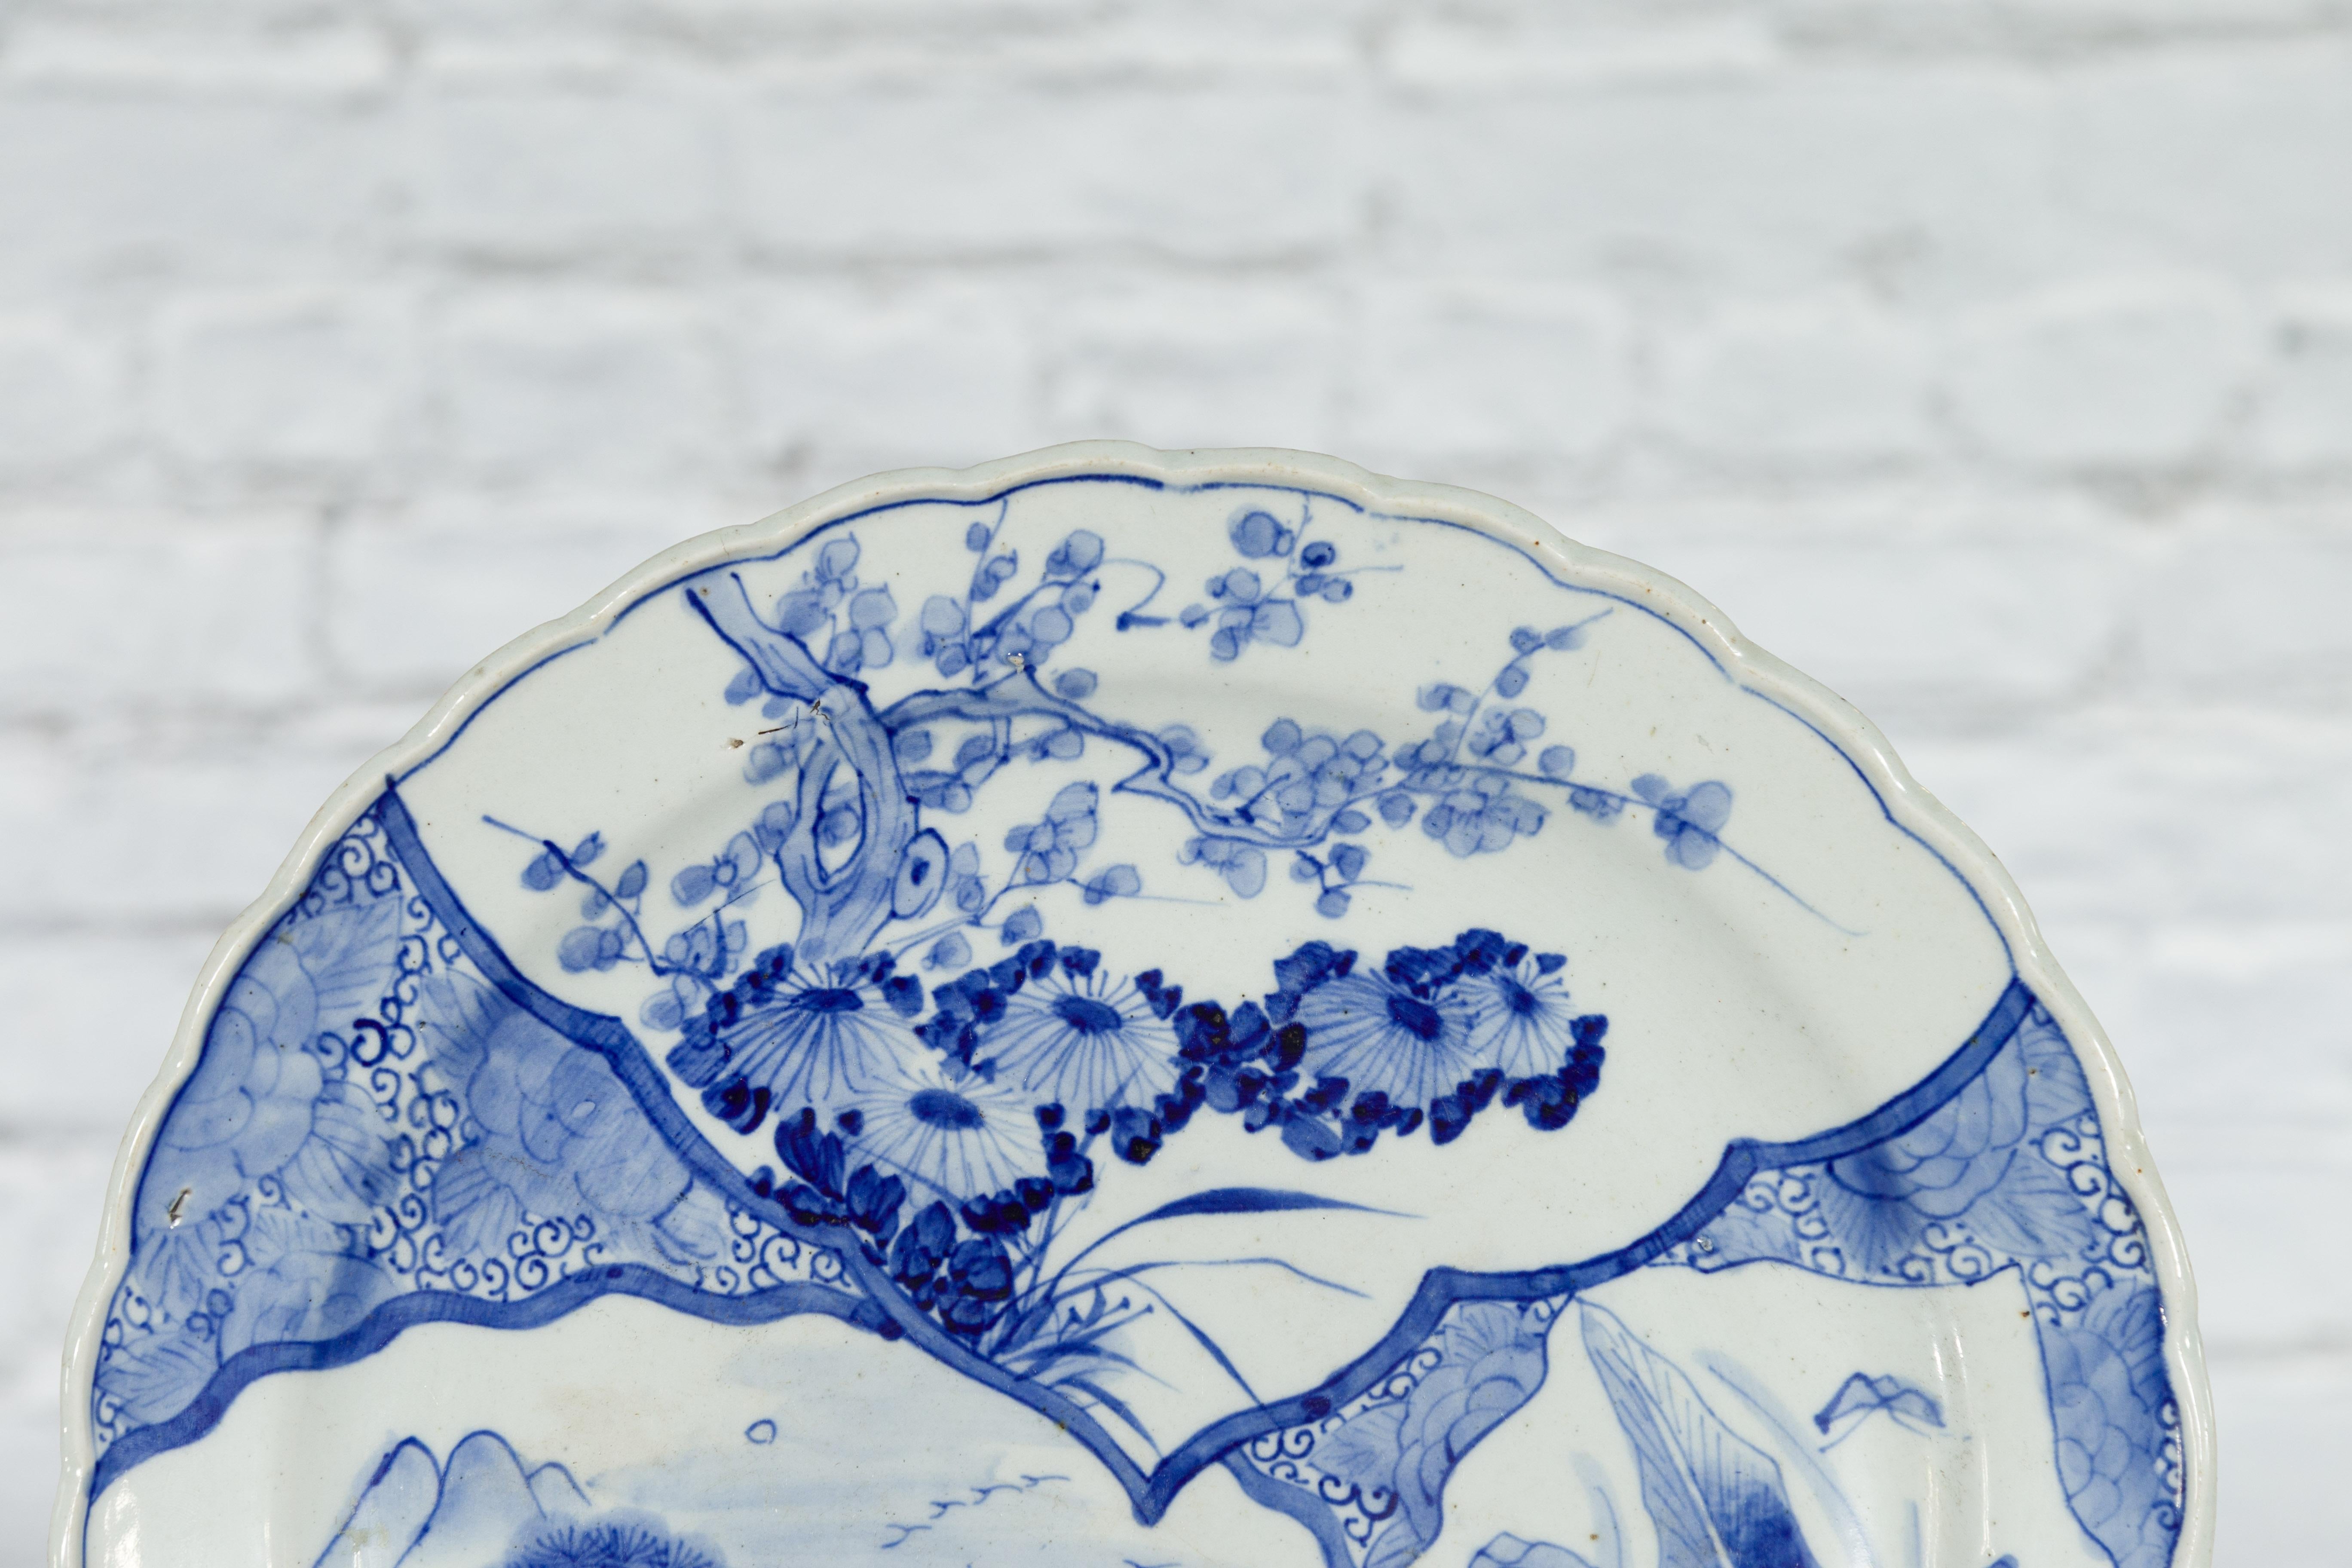 Japanese 19th Century Porcelain Imari Plate with Painted Blue and White Décor In Good Condition For Sale In Yonkers, NY